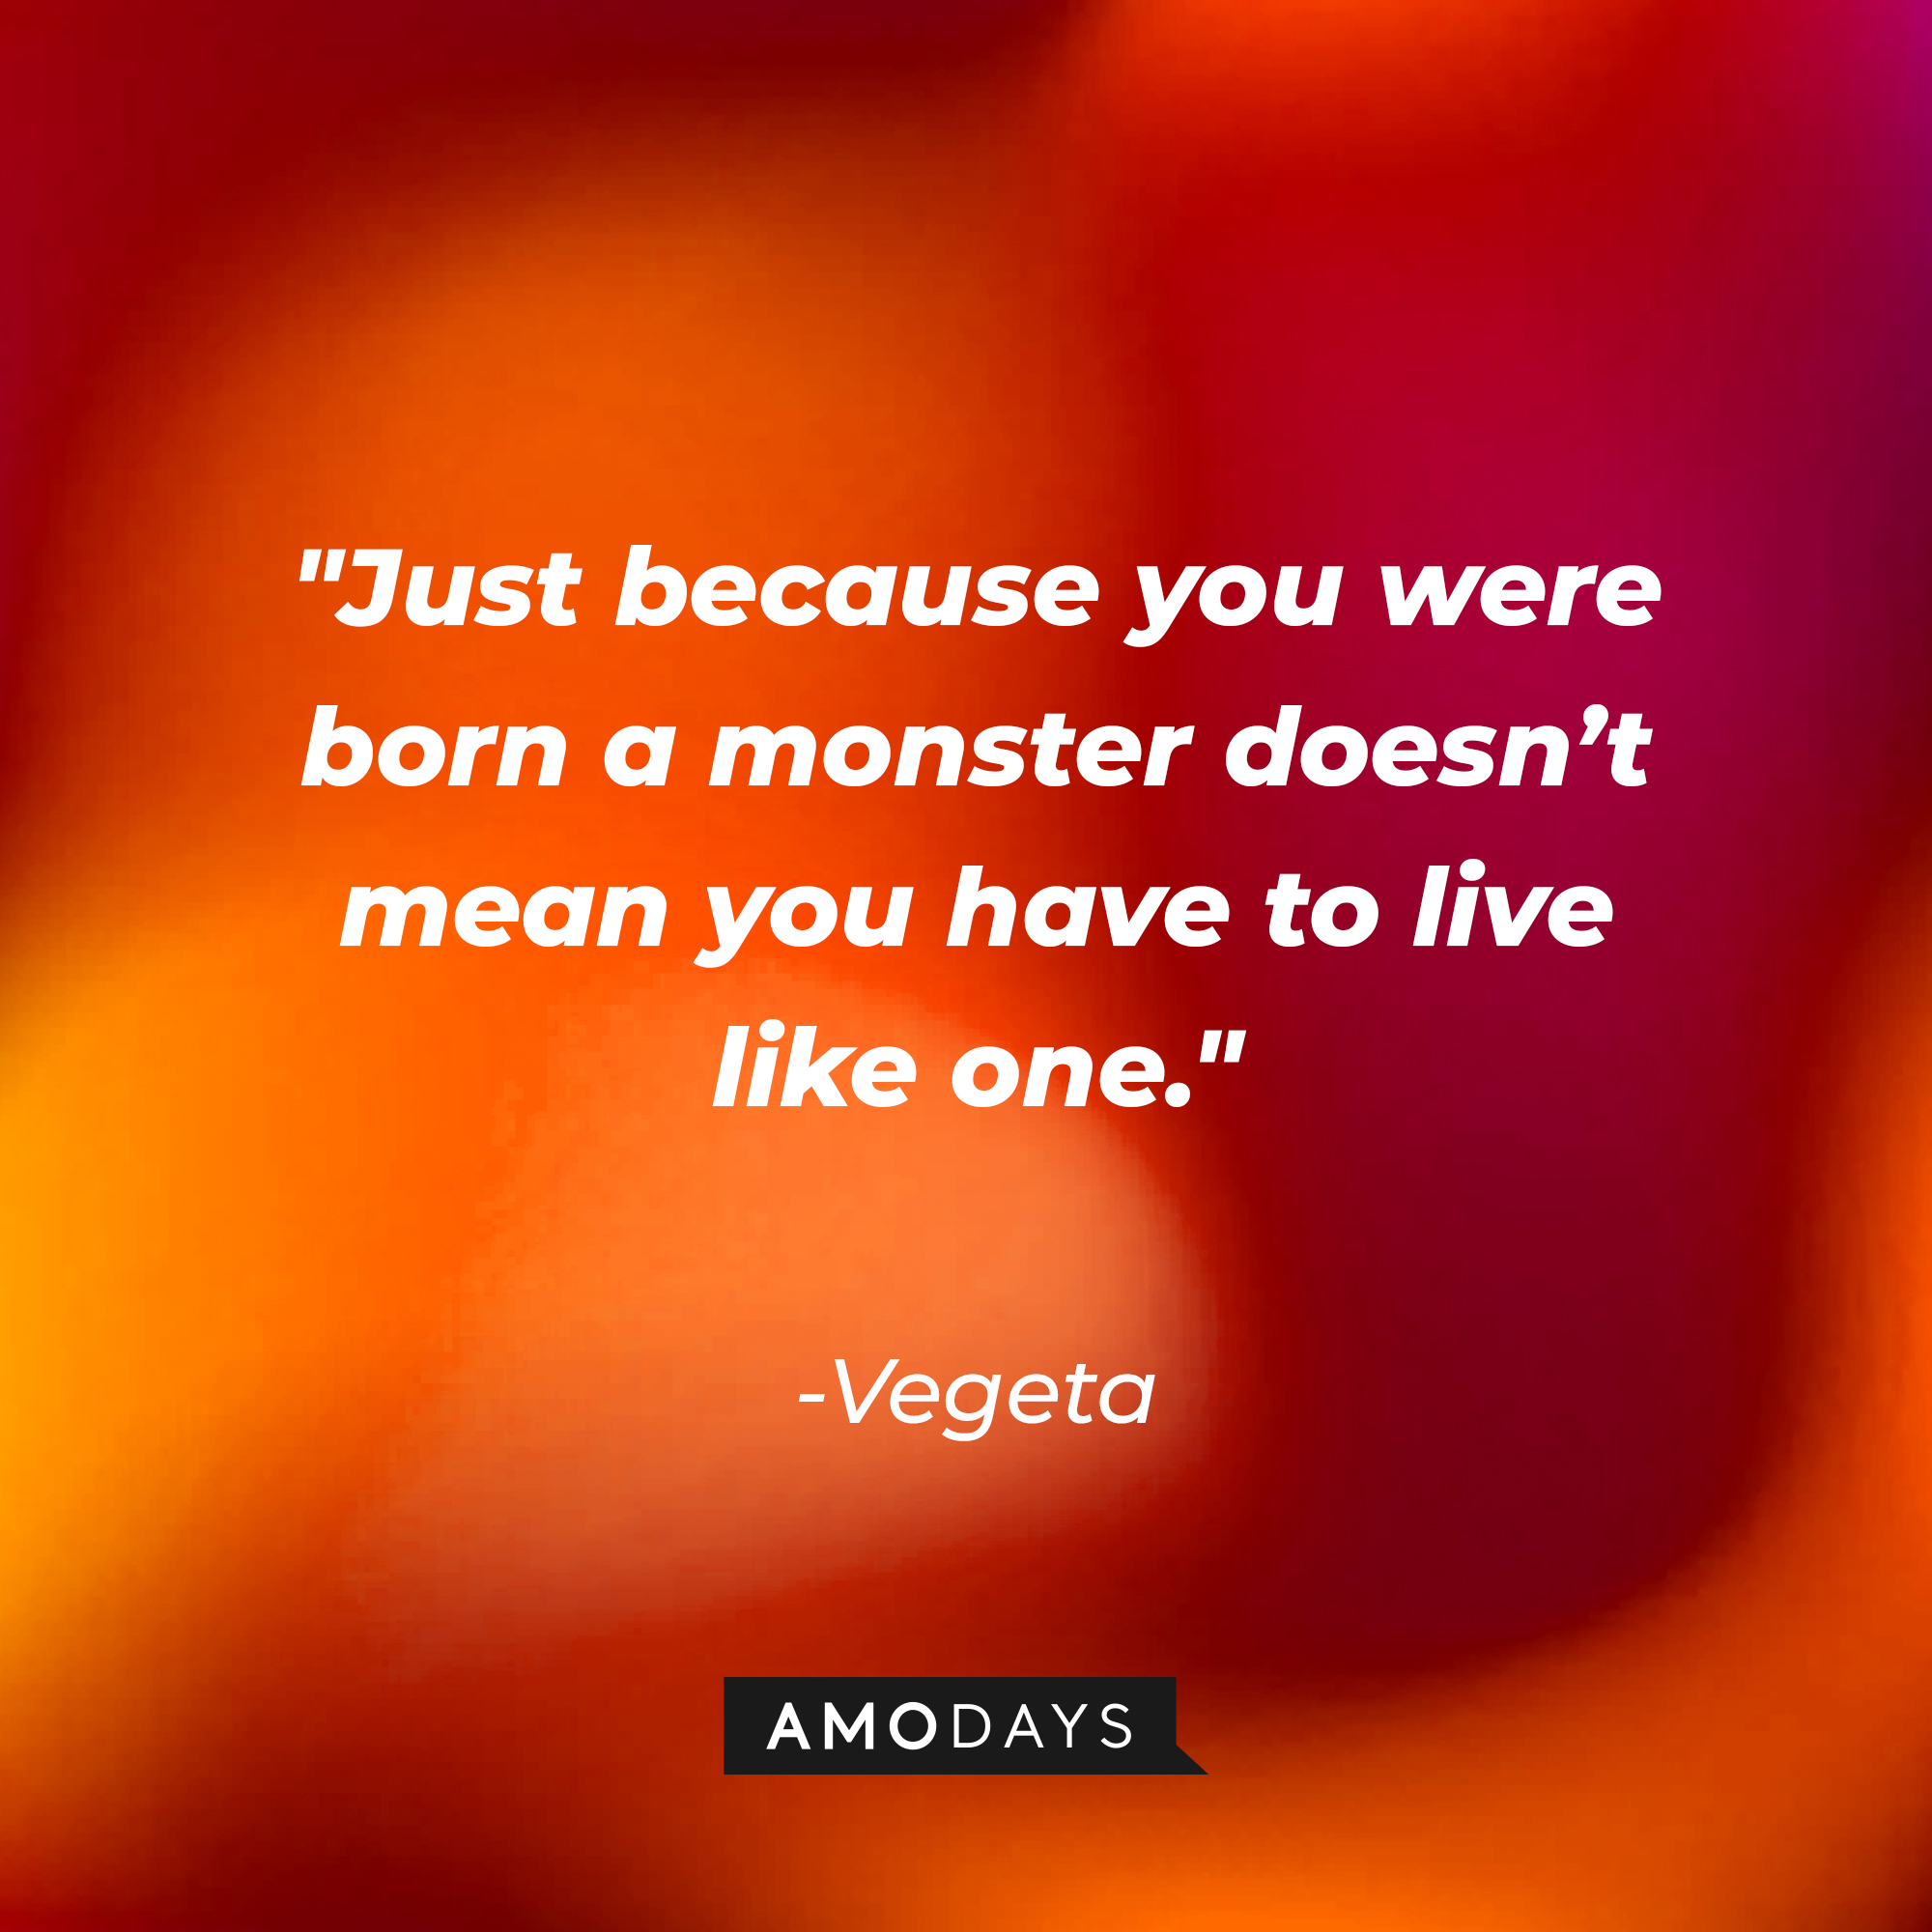 Vegeta's quote: "Just because you were born a monster doesn’t mean you have to live like one." | Source: Amodays